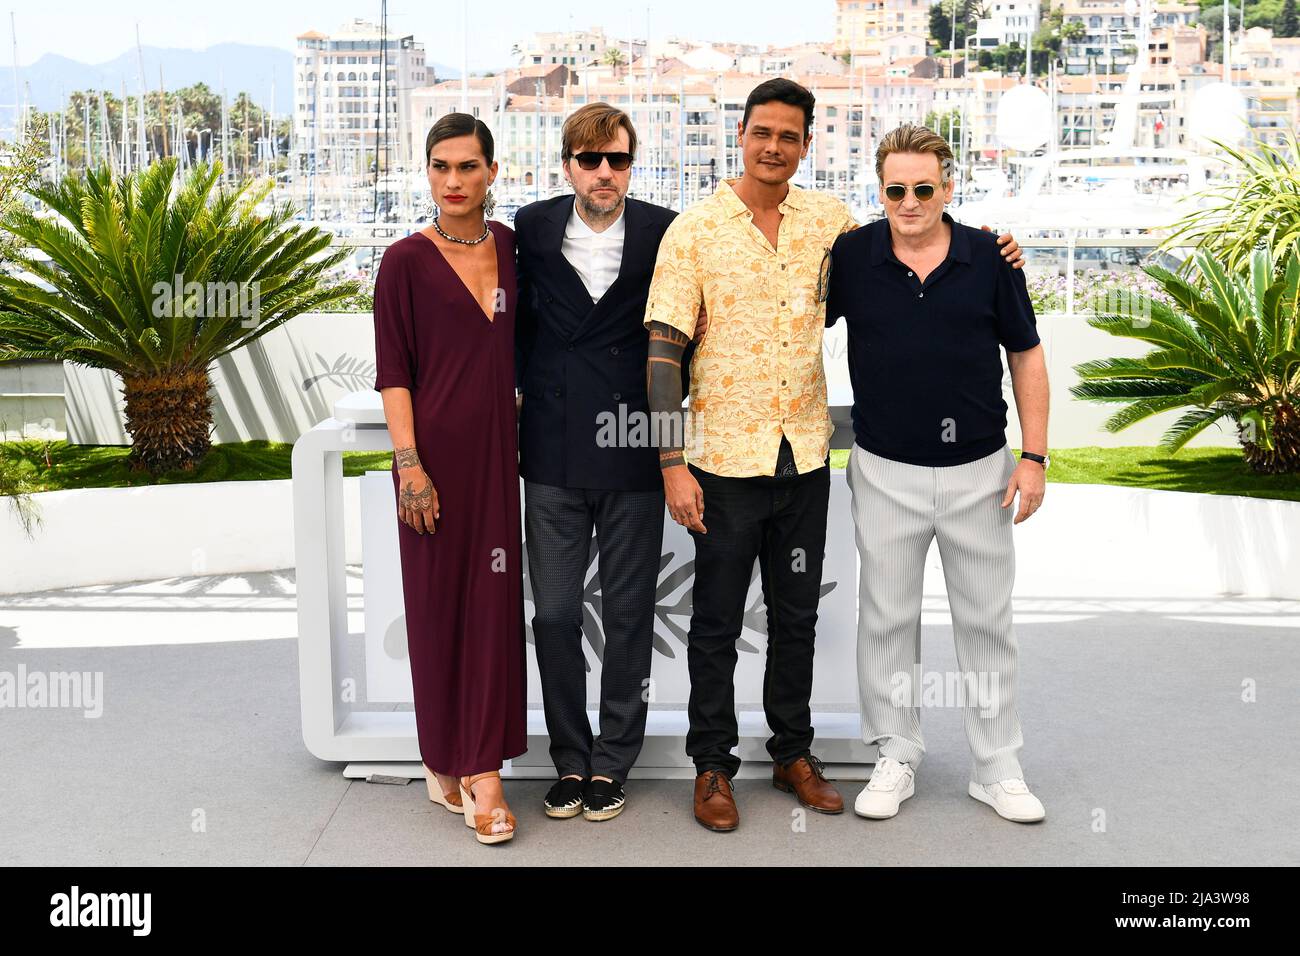 The 75th Cannes Film Festival - Photocall for the film 'Tourment sur les iles' (Pacifiction) in competition - Cannes, France, May 27, 2022. Director Albert Serra and cast members Benoit Magimel, Pahoa Mahagafanau and Matahi Pambrun pose. REUTERS/Piroschka Van De Wouw Stock Photo